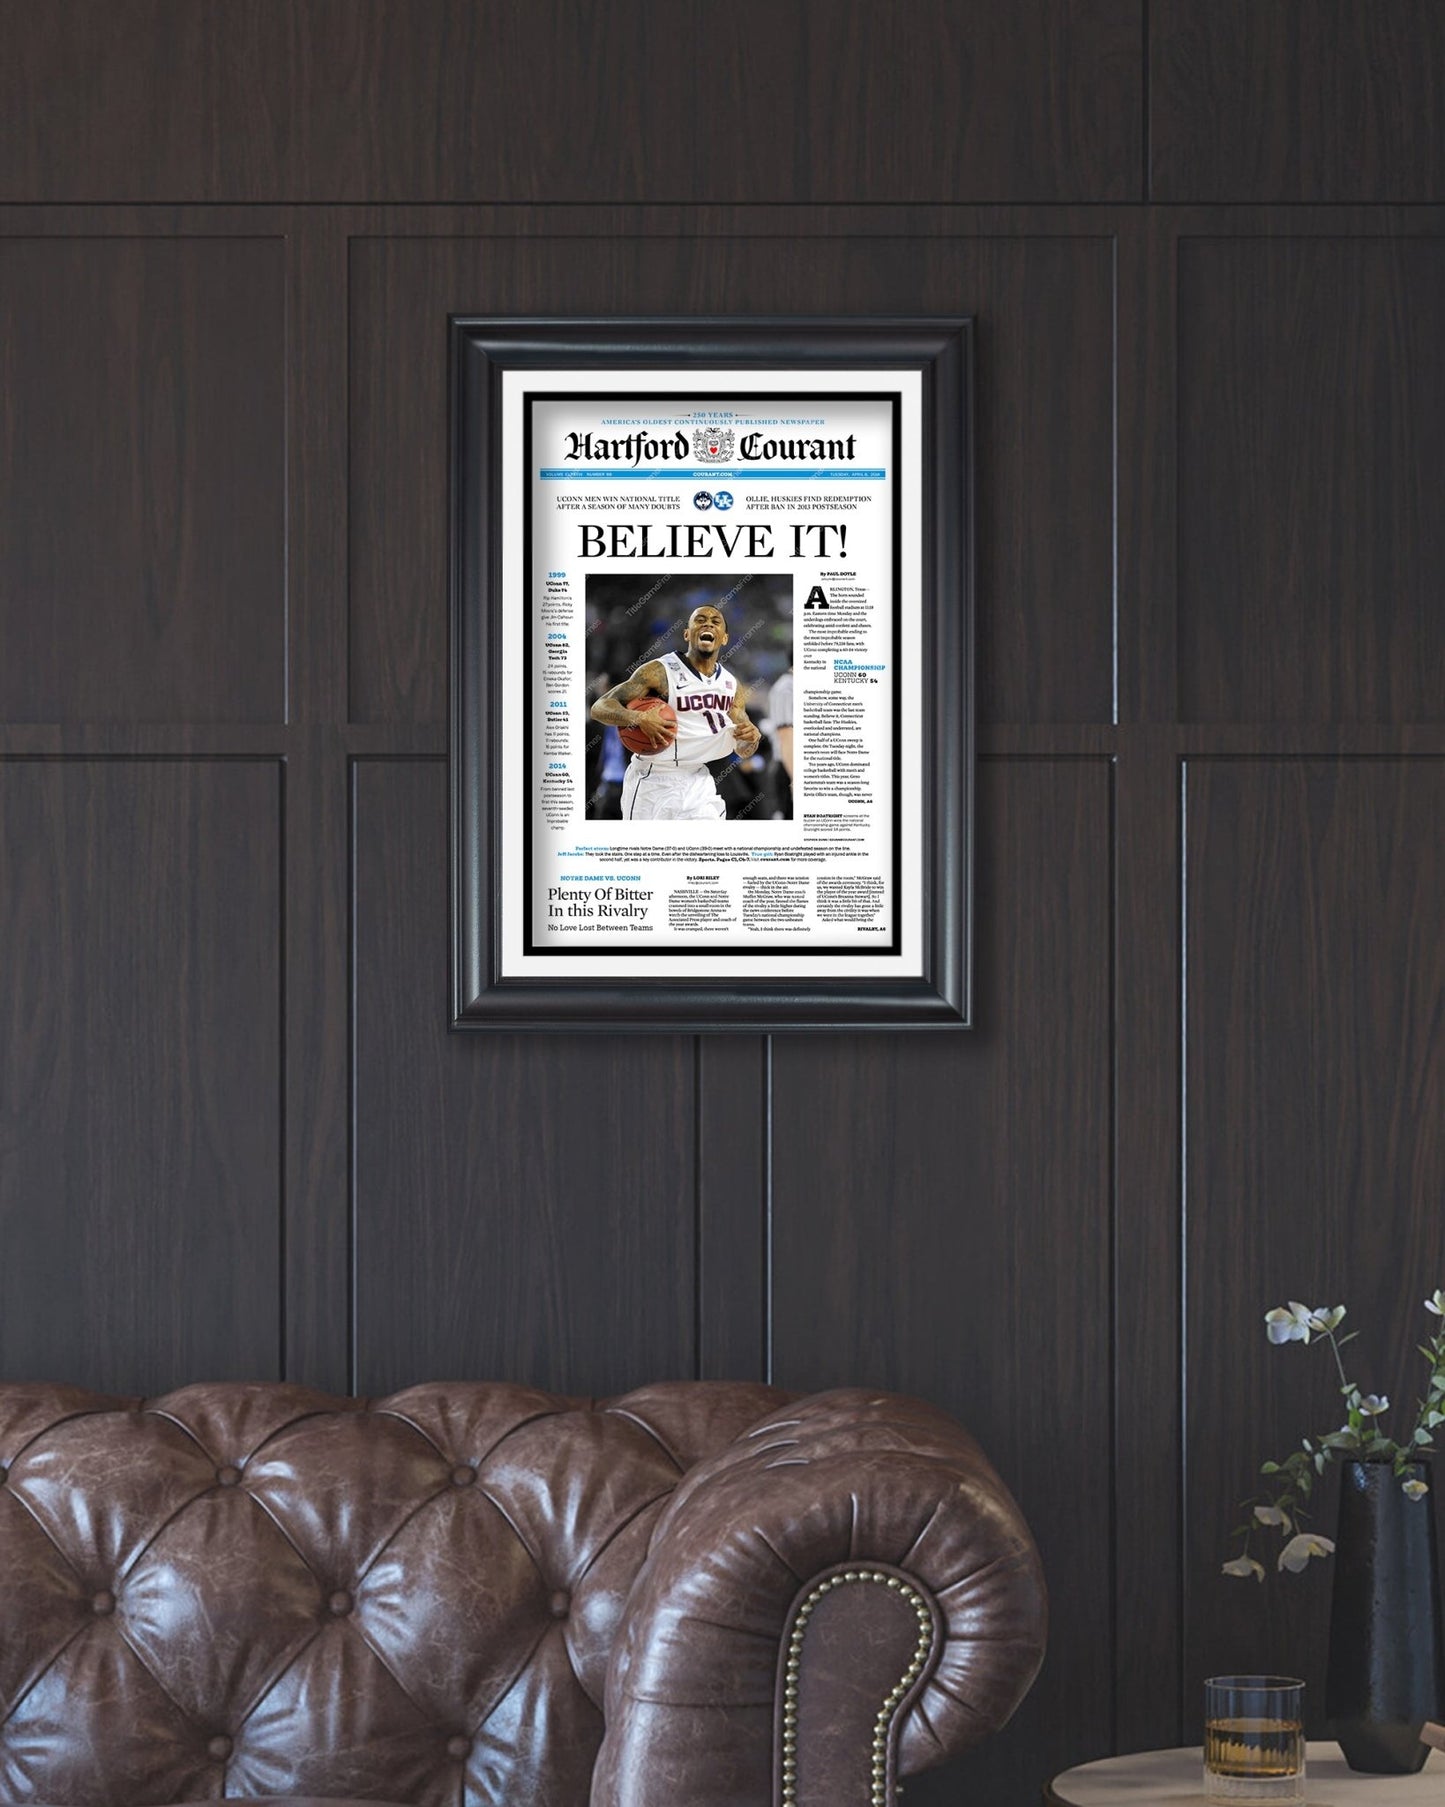 2014 UConn Huskies NCAA College Basketball Champions 'BELIEVE IT!' Framed Front Page Newspaper - Title Game Frames